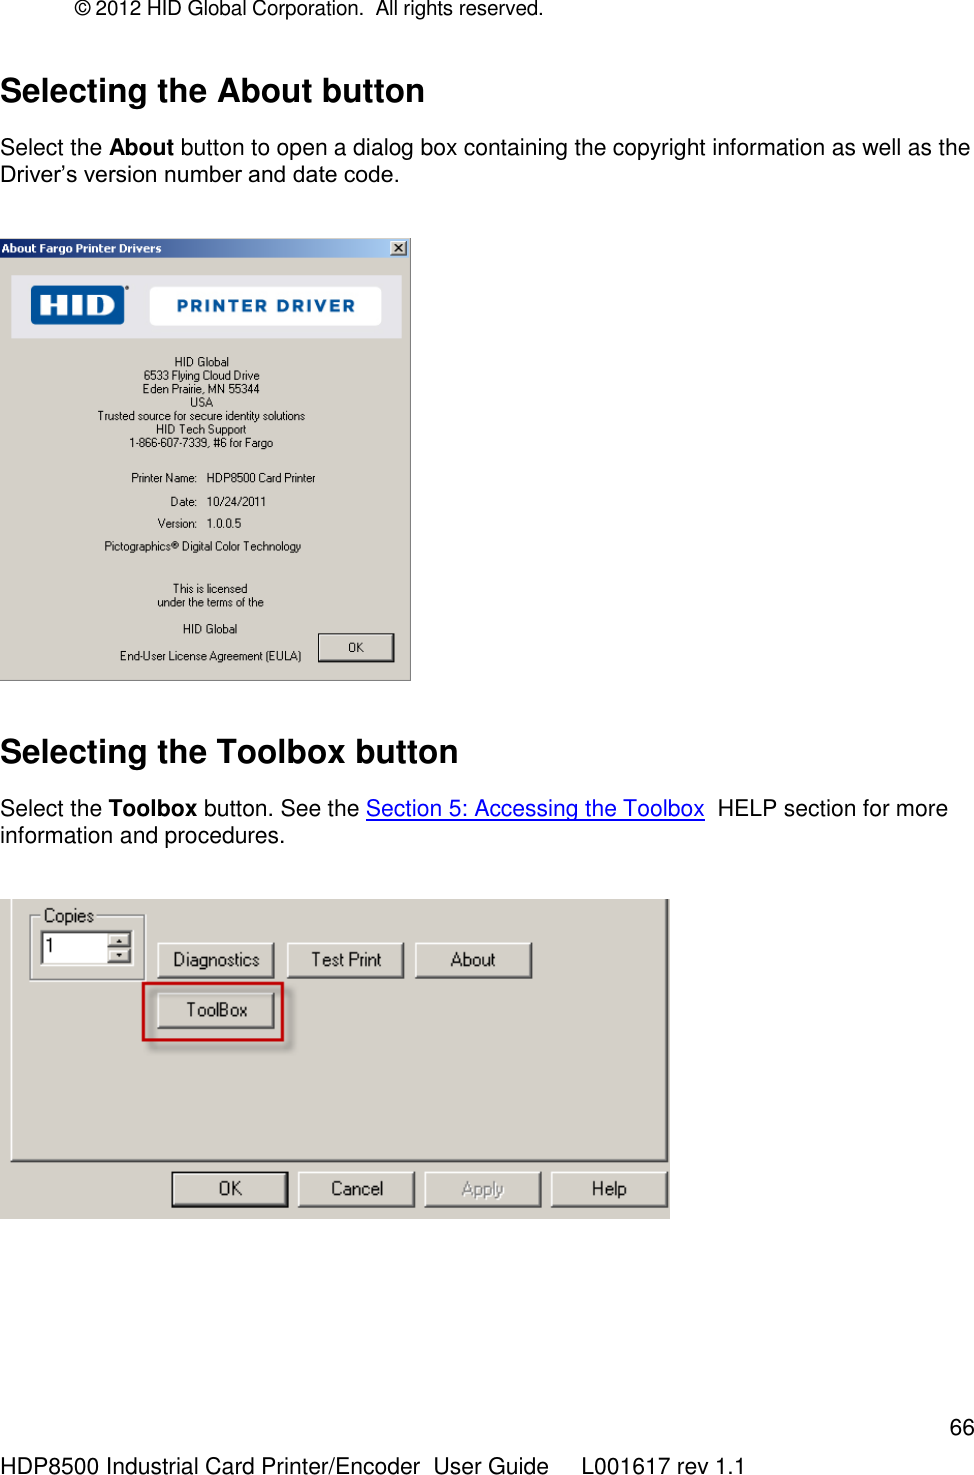 © 2012 HID Global Corporation.  All rights reserved.  66 HDP8500 Industrial Card Printer/Encoder  User Guide     L001617 rev 1.1 Selecting the About button Select the About button to open a dialog box containing the copyright information as well as the Driver‟s version number and date code.       Selecting the Toolbox button Select the Toolbox button. See the Section 5: Accessing the Toolbox  HELP section for more information and procedures.    